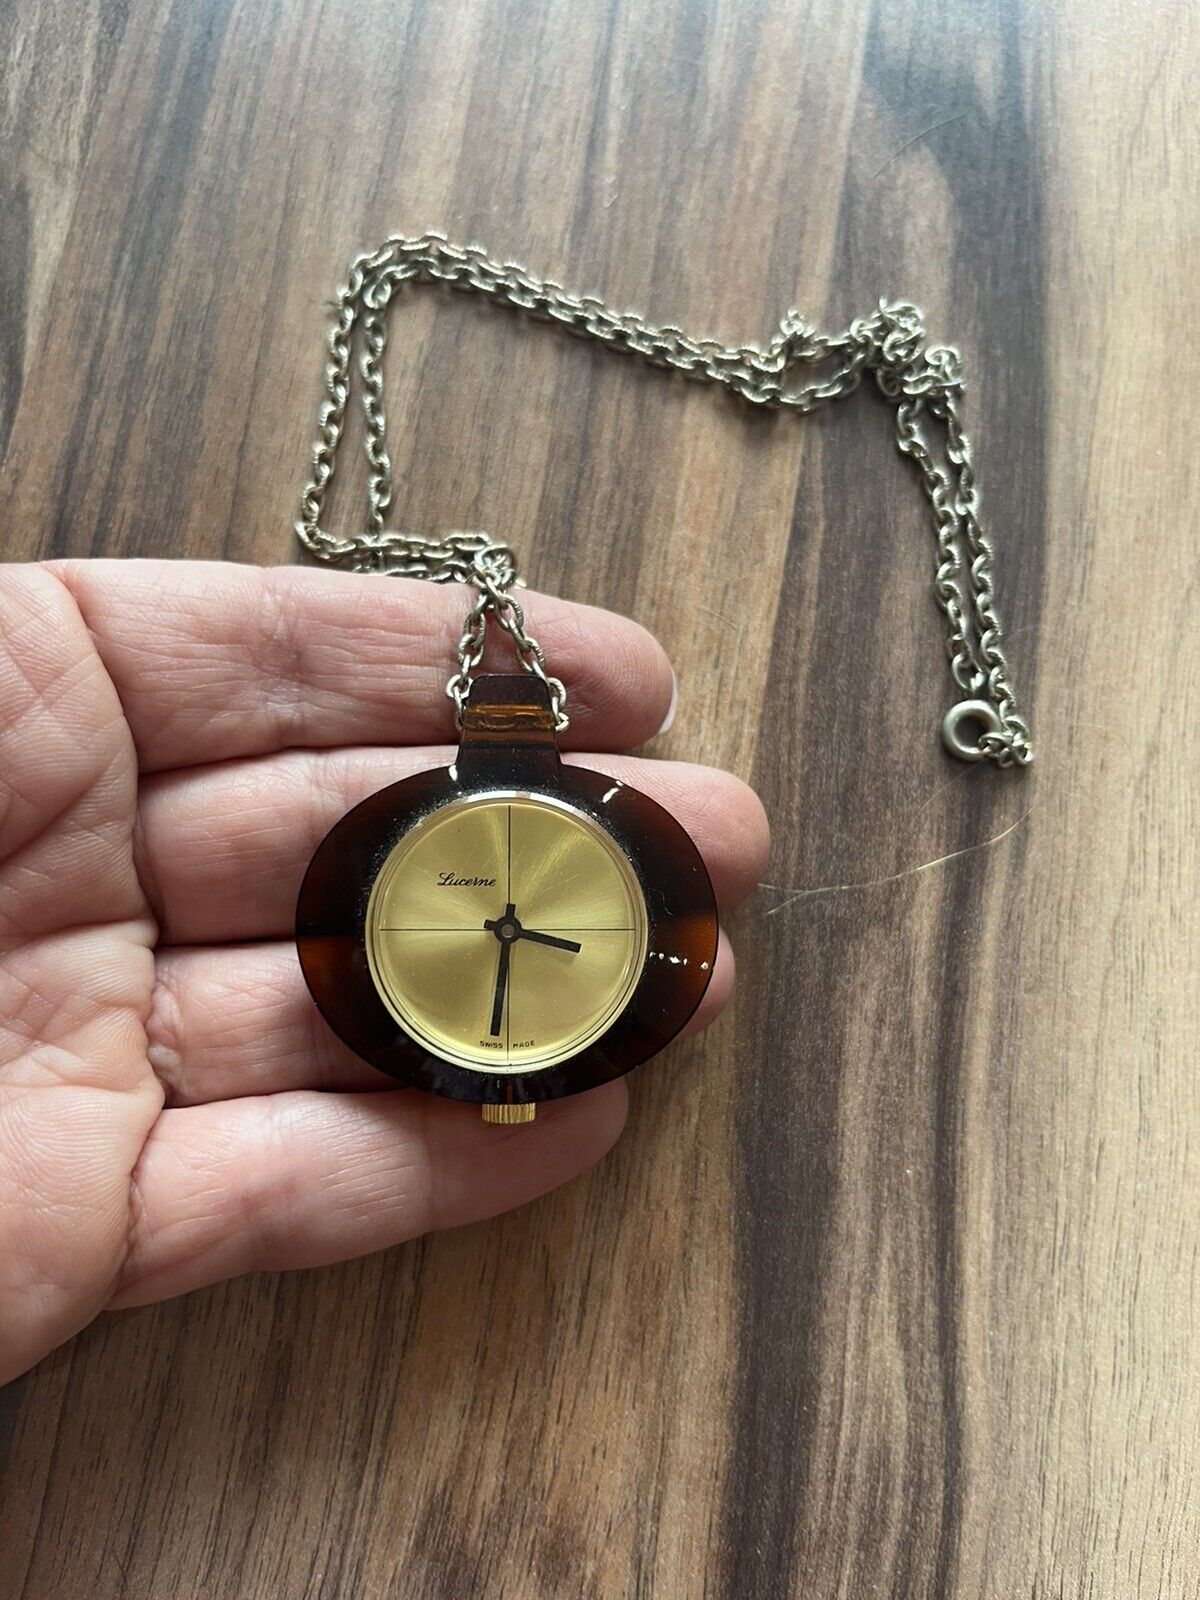 Vintage Swiss Lucerne Gold Watch Necklace or Pocket Watch - Etsy